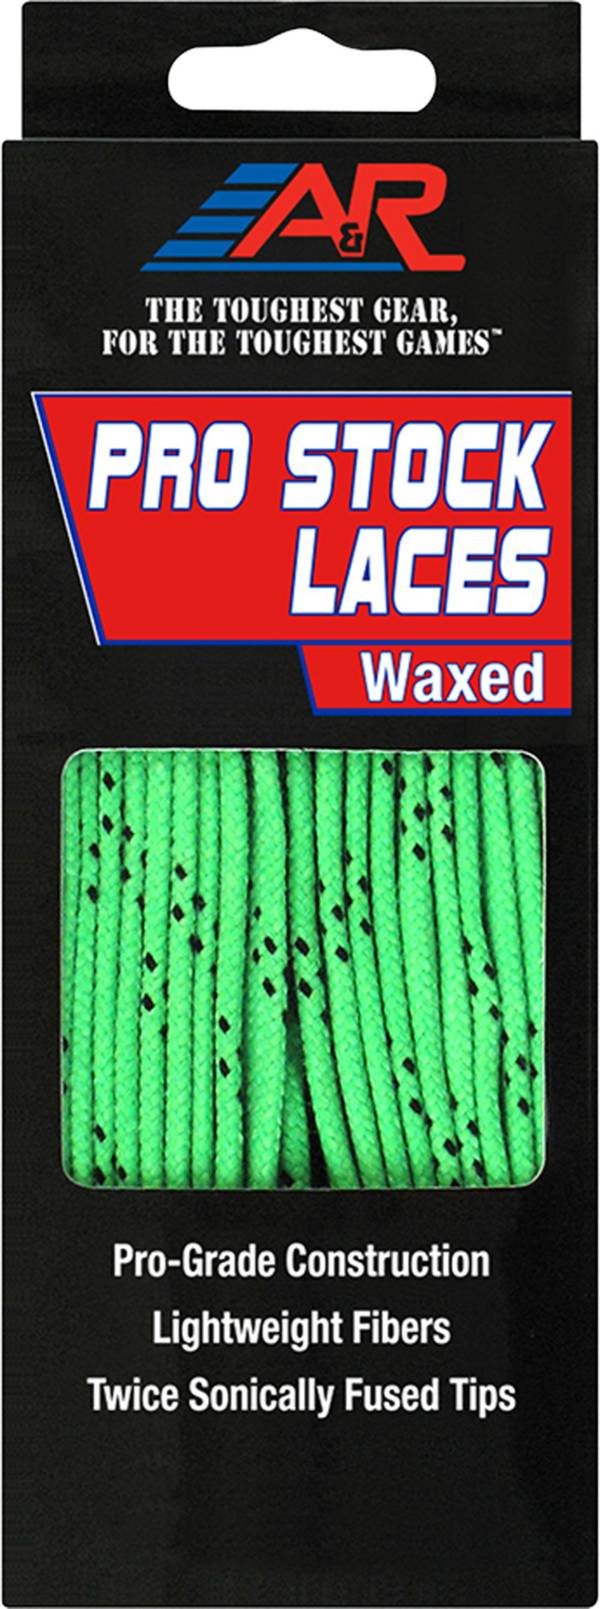 A&R Pro-Stock Waxed Hockey Skate Laces product image